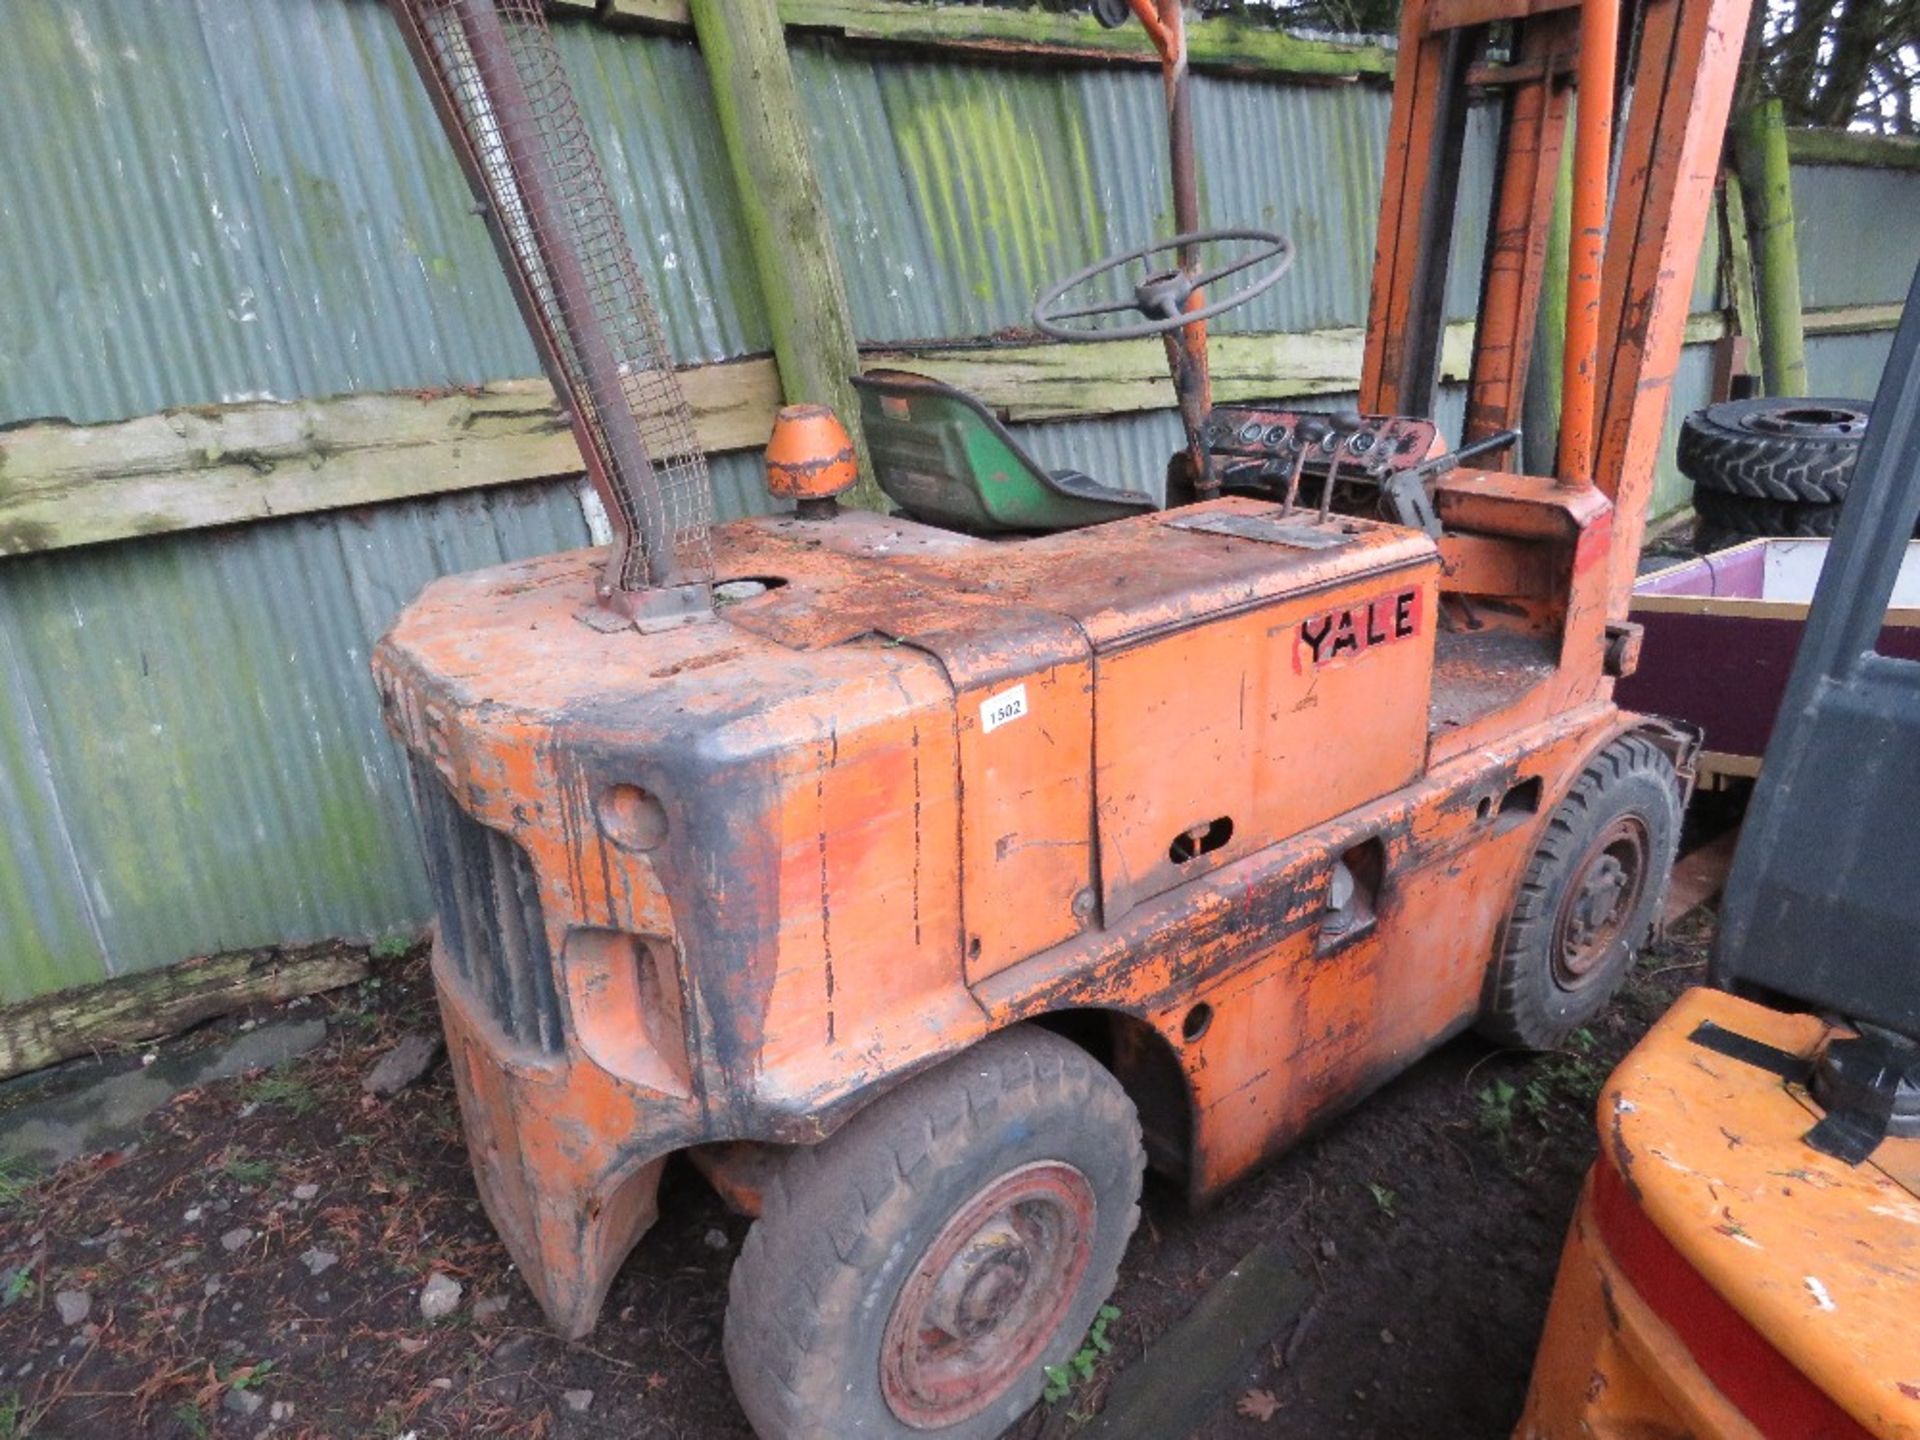 YALE DIESEL FORKLIFT TRUCK. WHEN TESTED WAS SEEN TO DRIVE, BRAKE AND LIFT (STEERING TIGHT). SEE VIDE